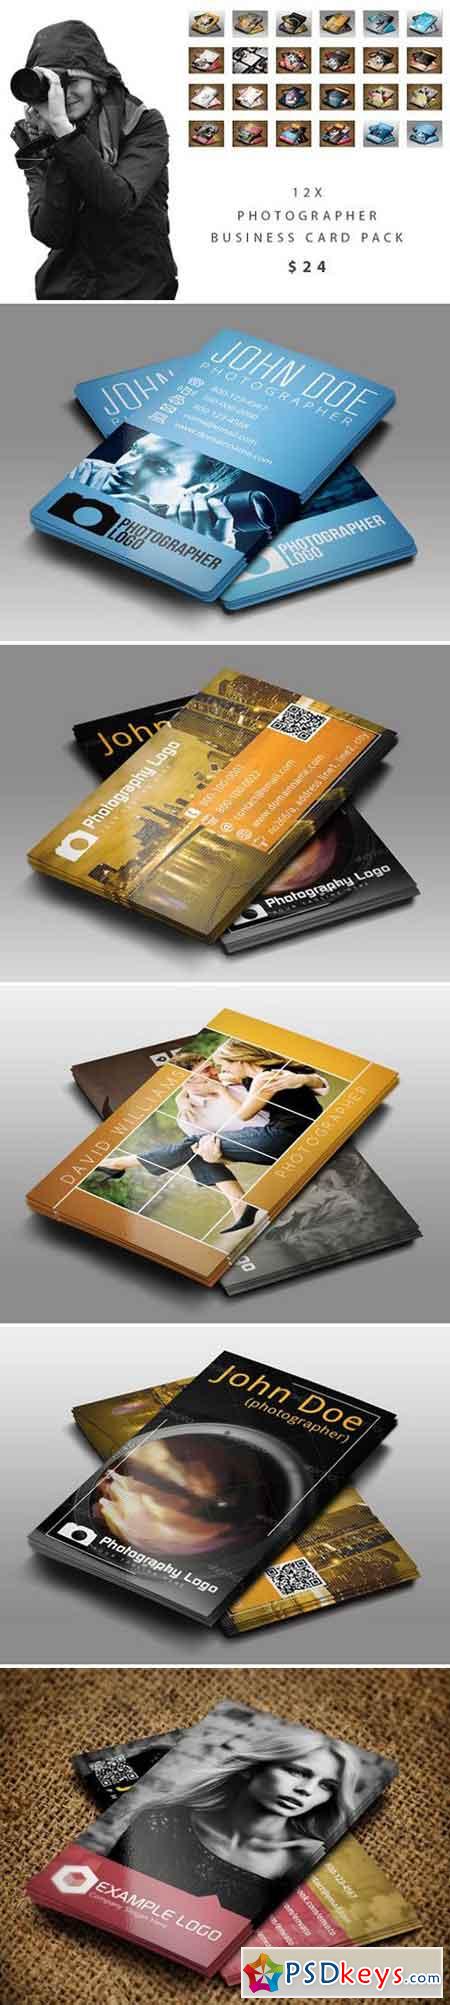 12 Photographer Business Cards 1655291